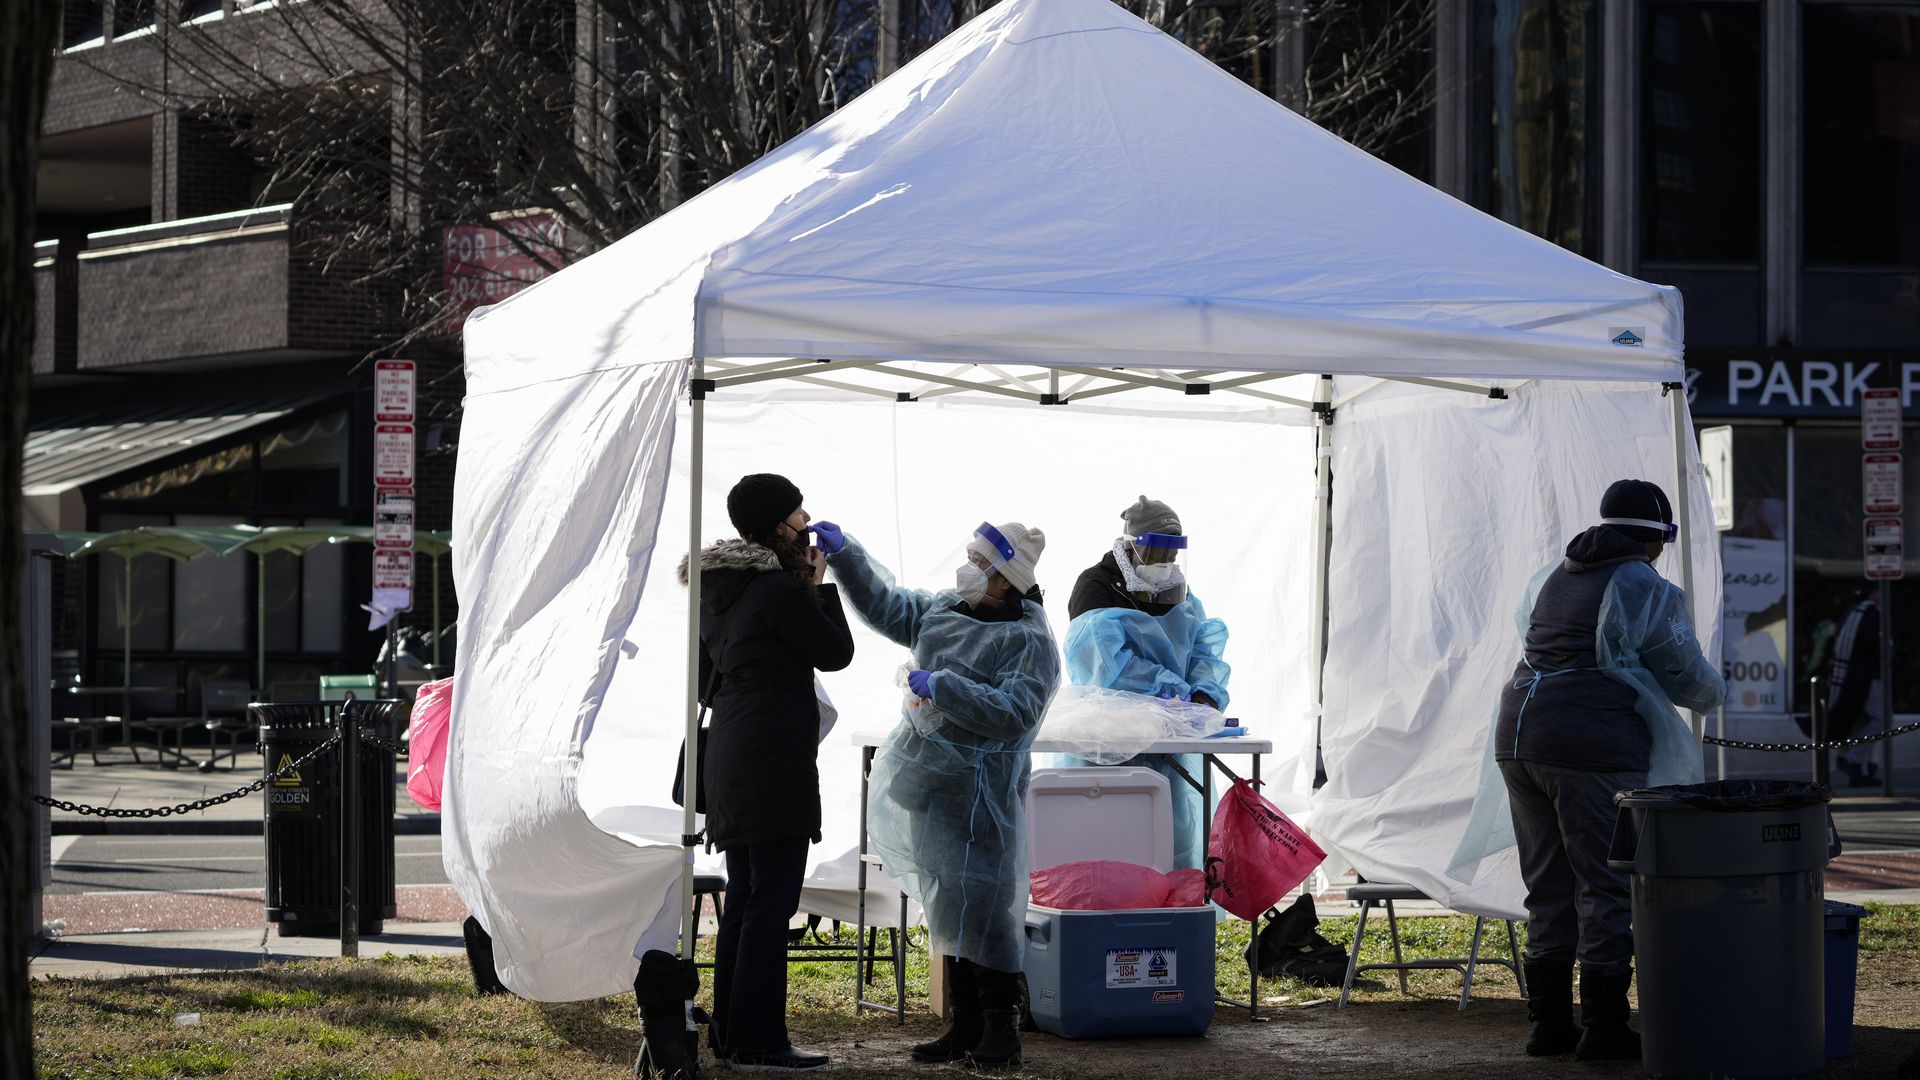 A coronavirus testing clinic is set up under a tent at a public park in Washington, D.C.